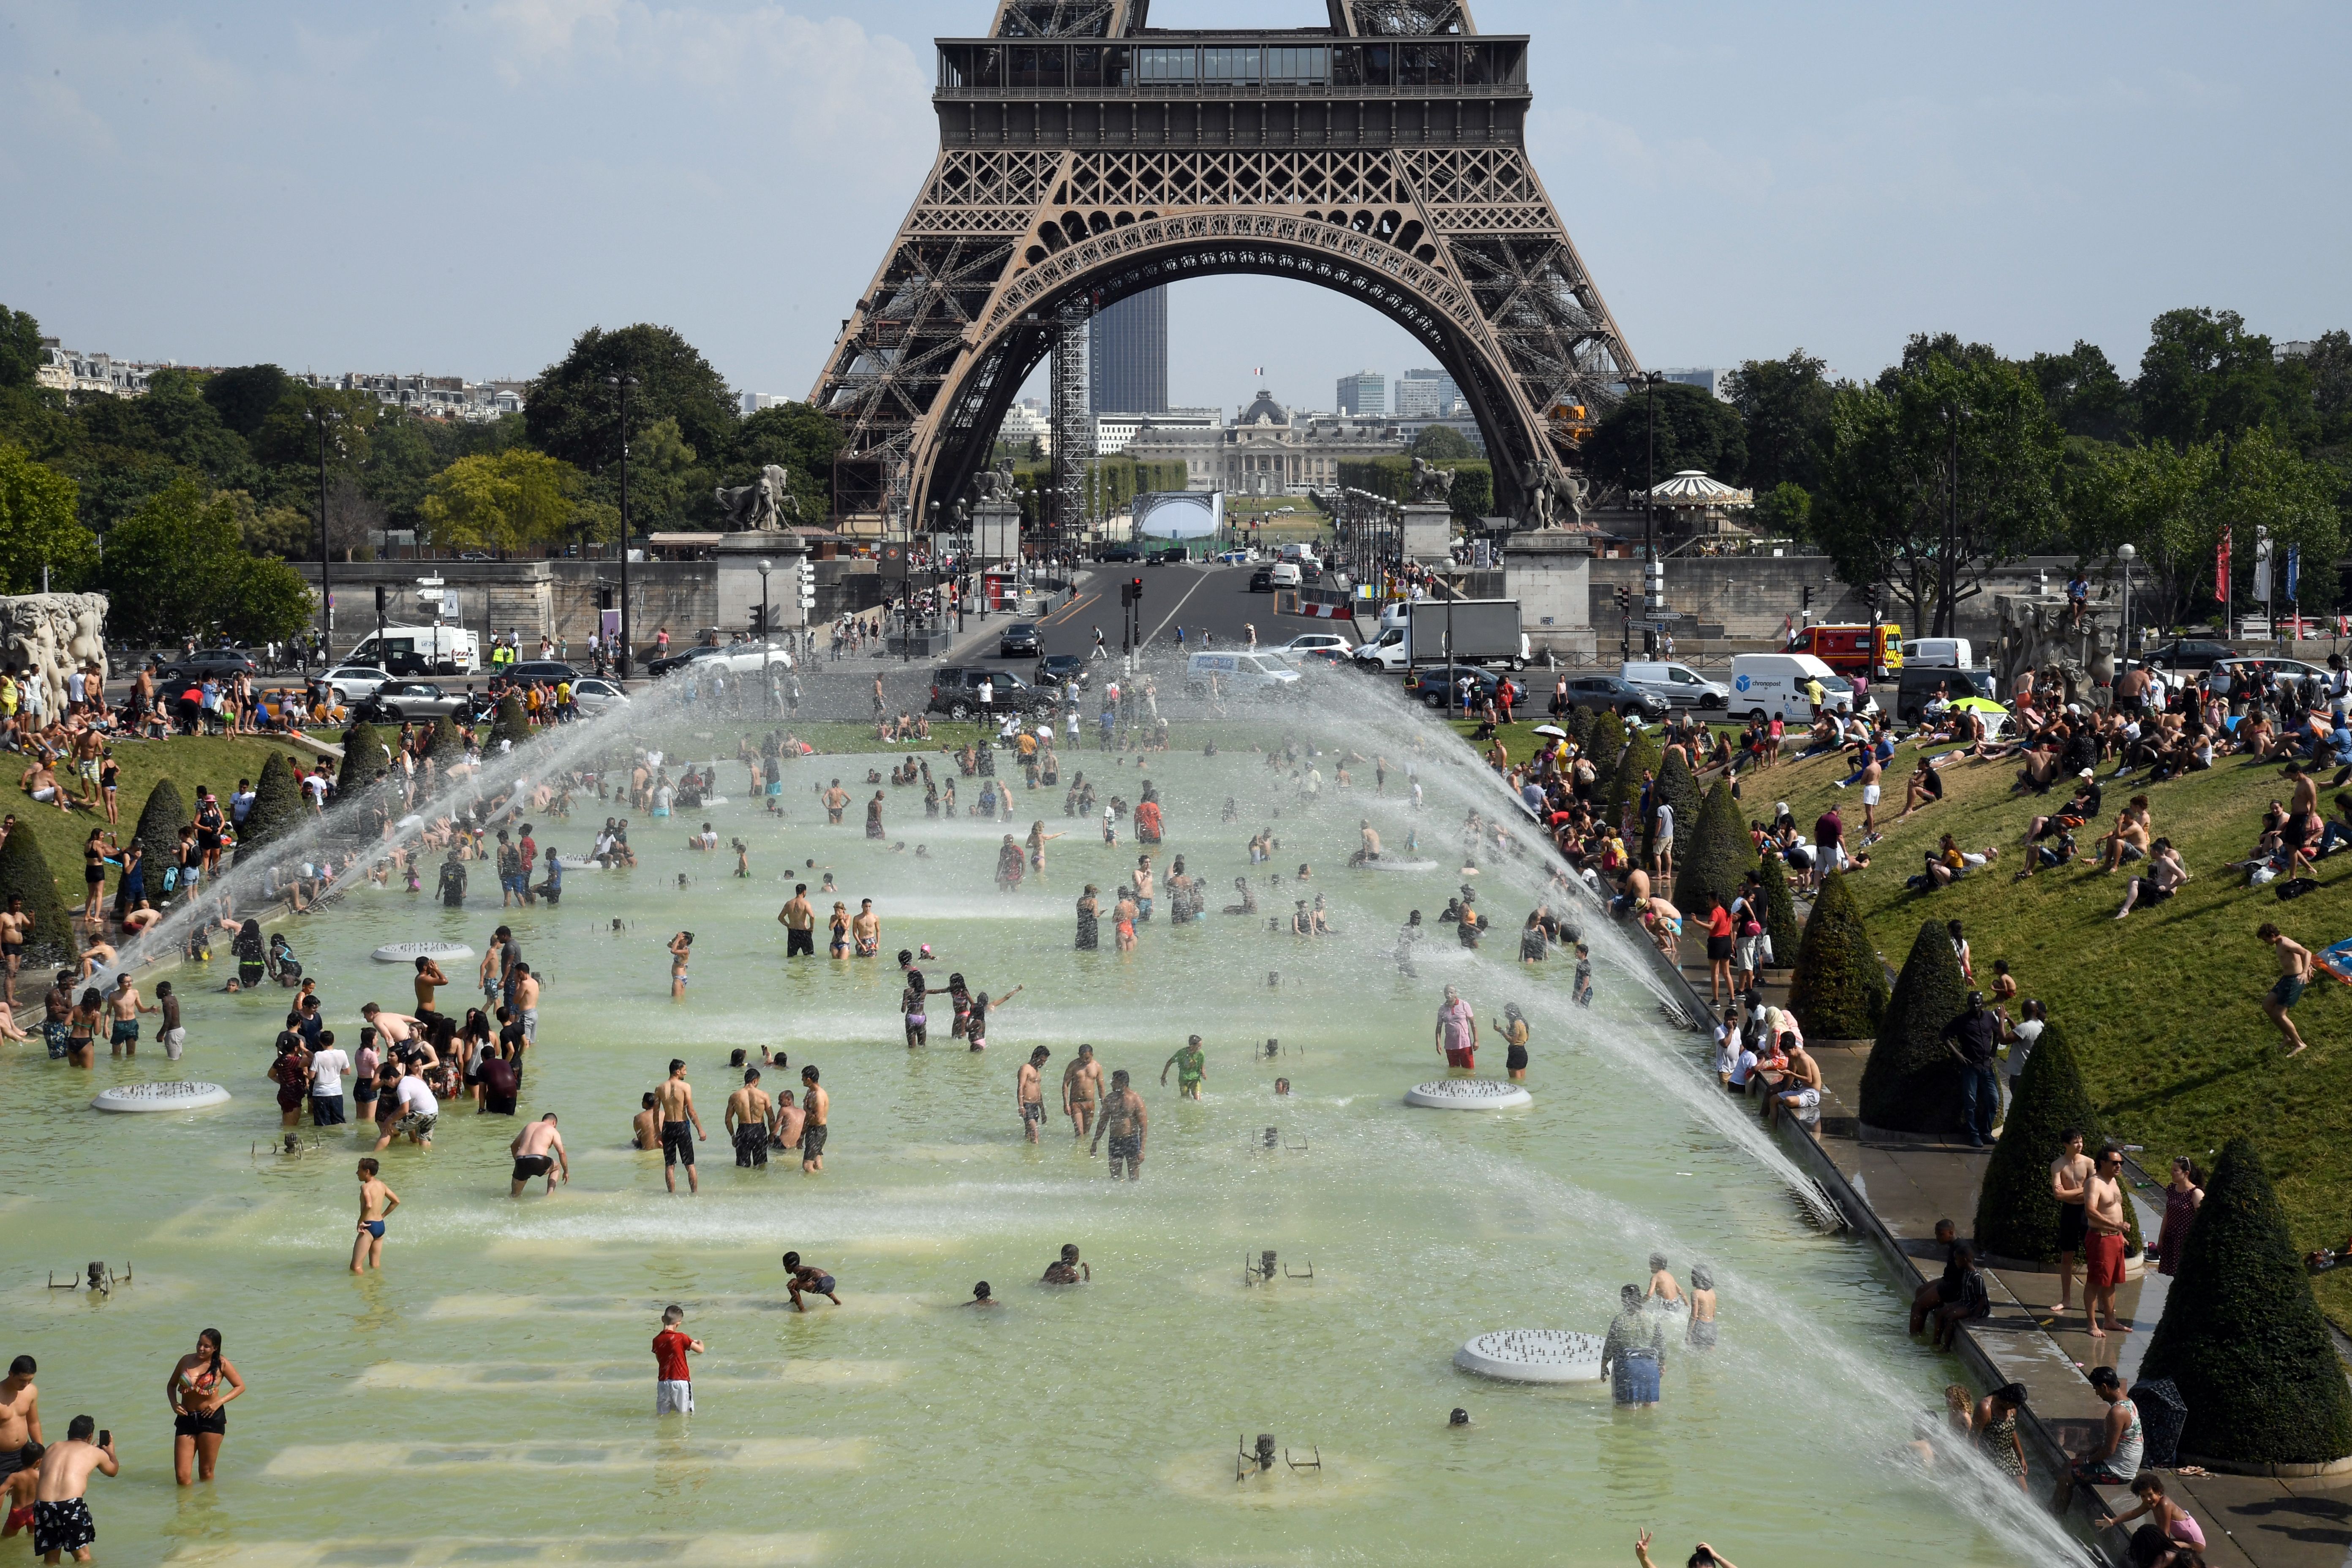 People cool off and sunbathe at the Trocadero Fountains in Paris on July 25, 2019 as a heat wave hits the French capital. 